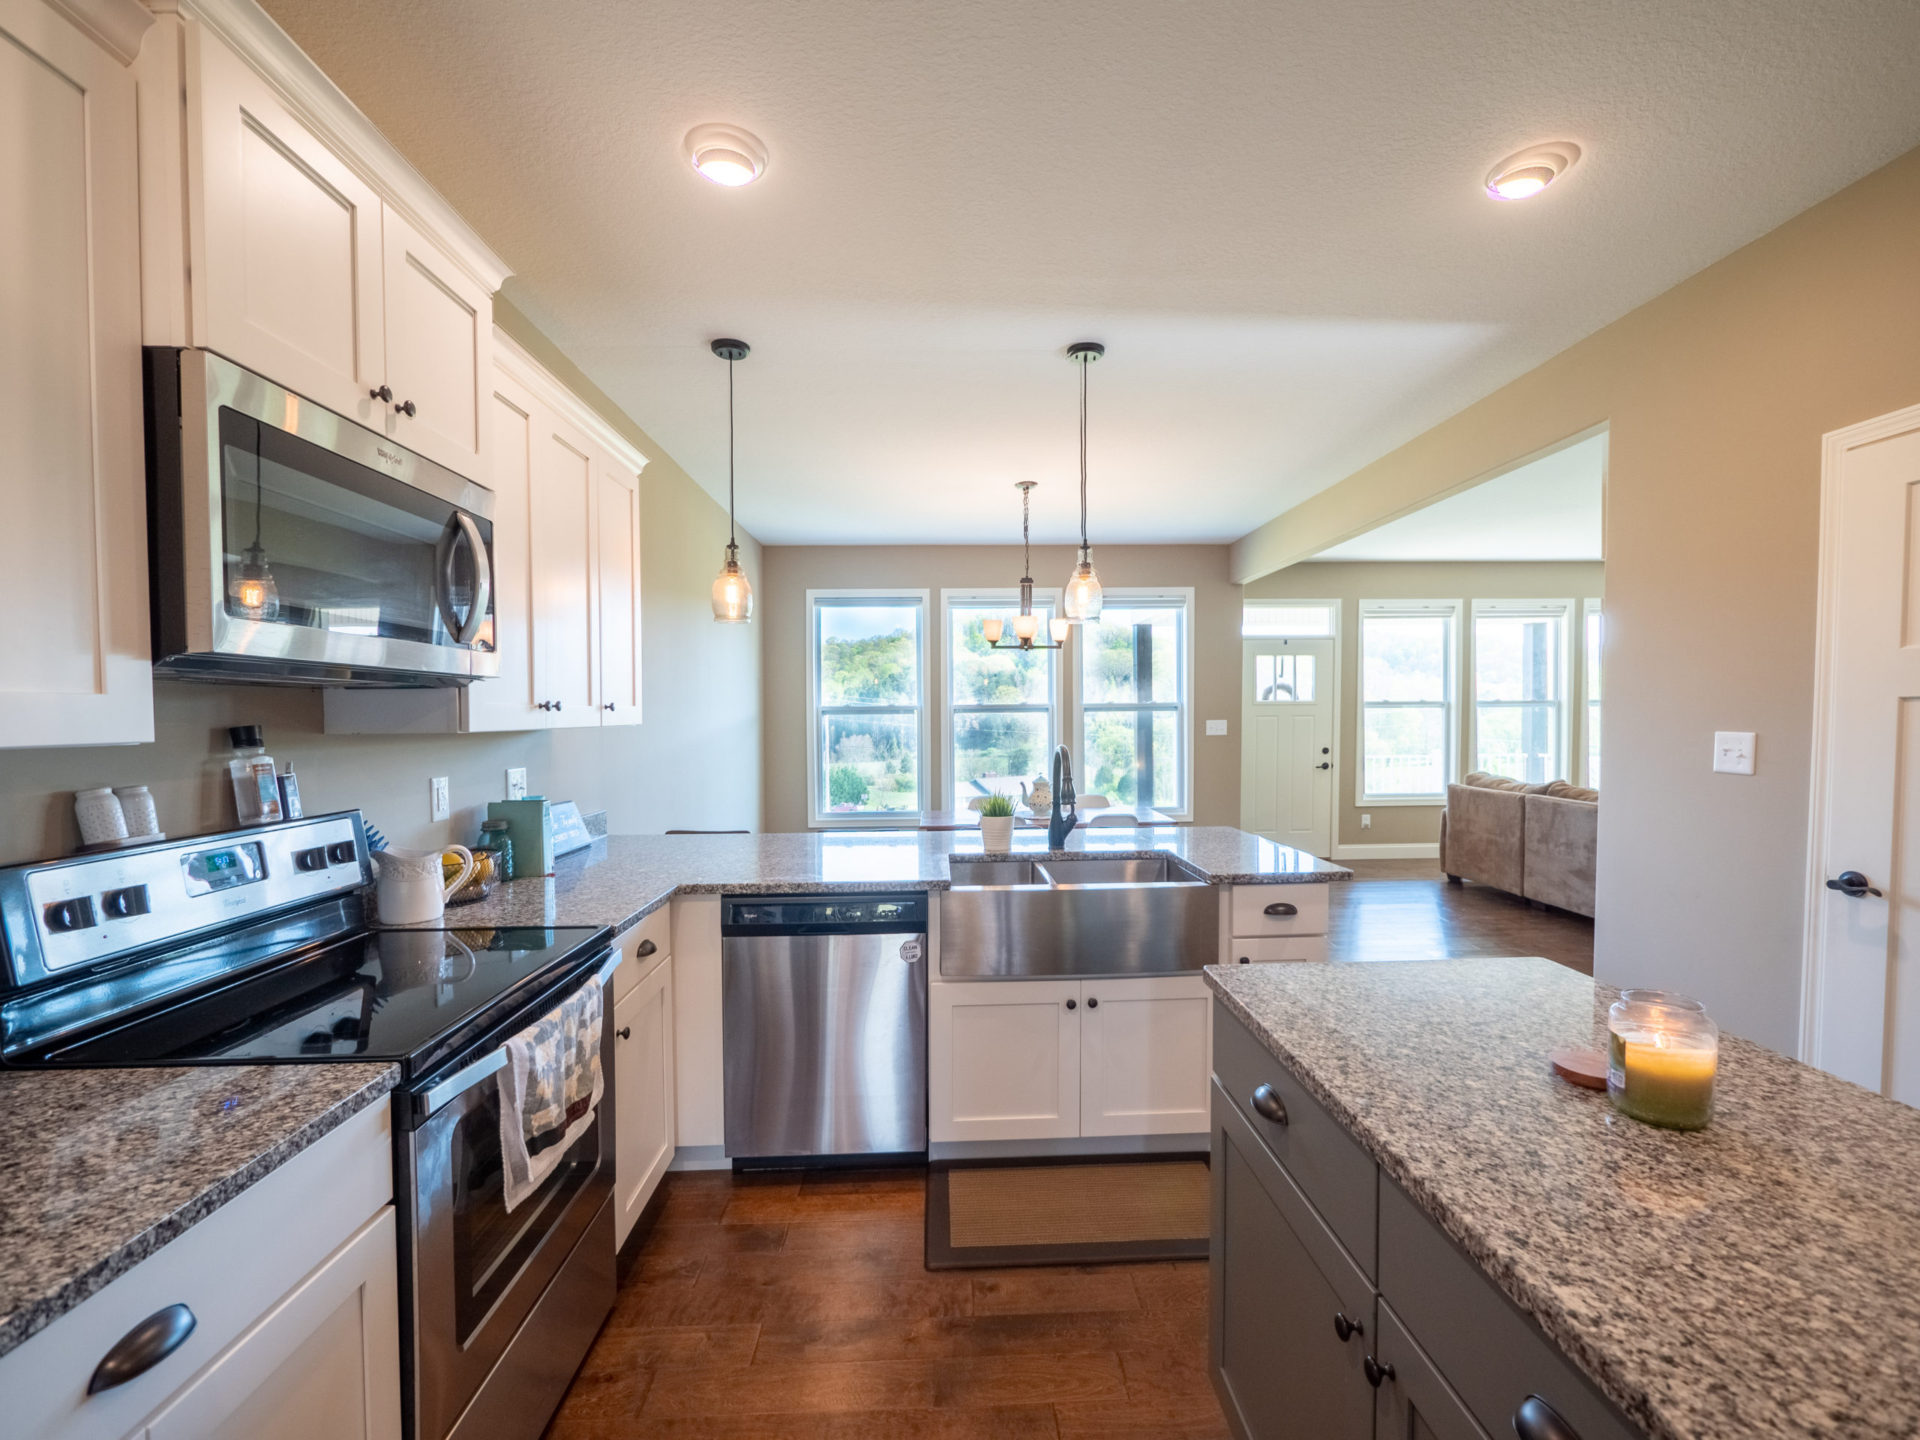 Real Estate Image of Kitchen- Tatro Creative Real Estate Photography